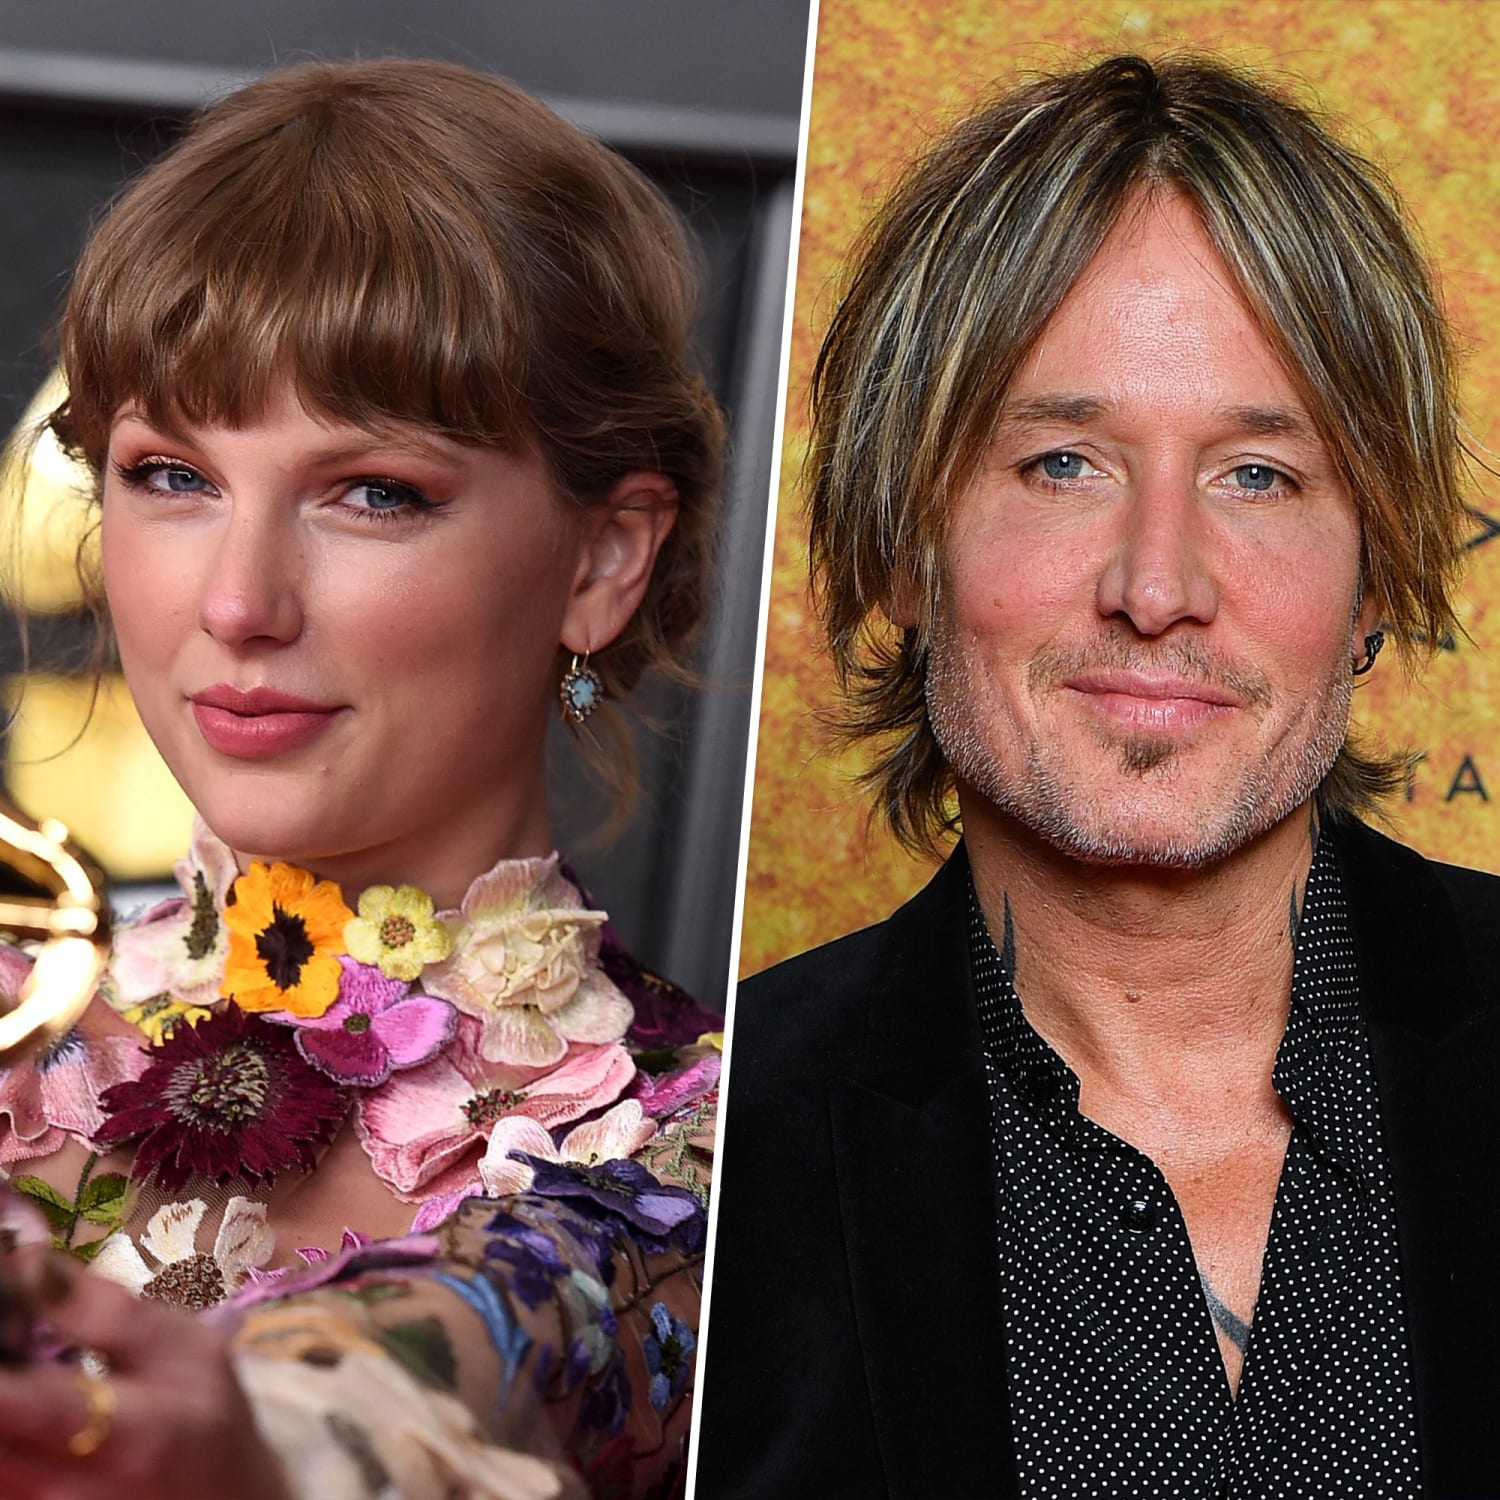 Taylor Swift confirms Keith Urban will sing on her next album